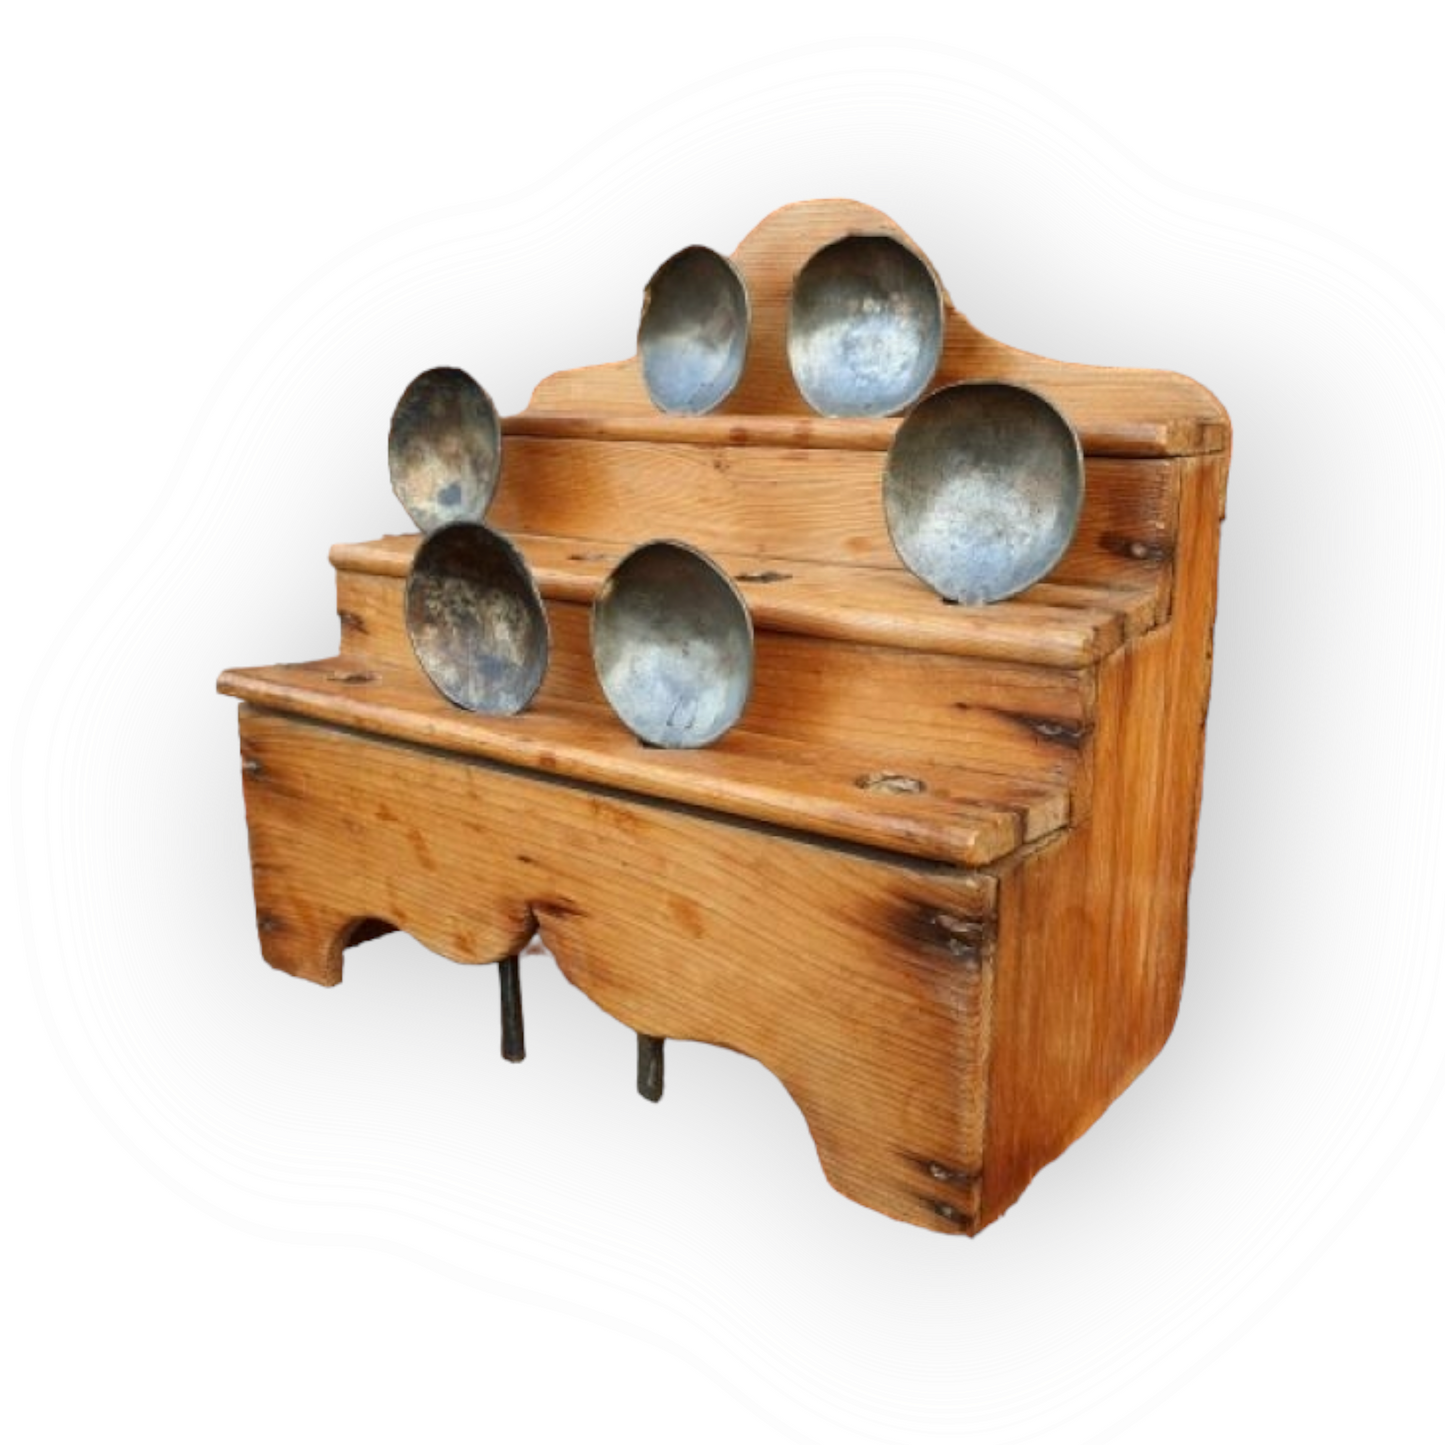 19th Century Welsh Antique Pine Stepped Spoon Rack